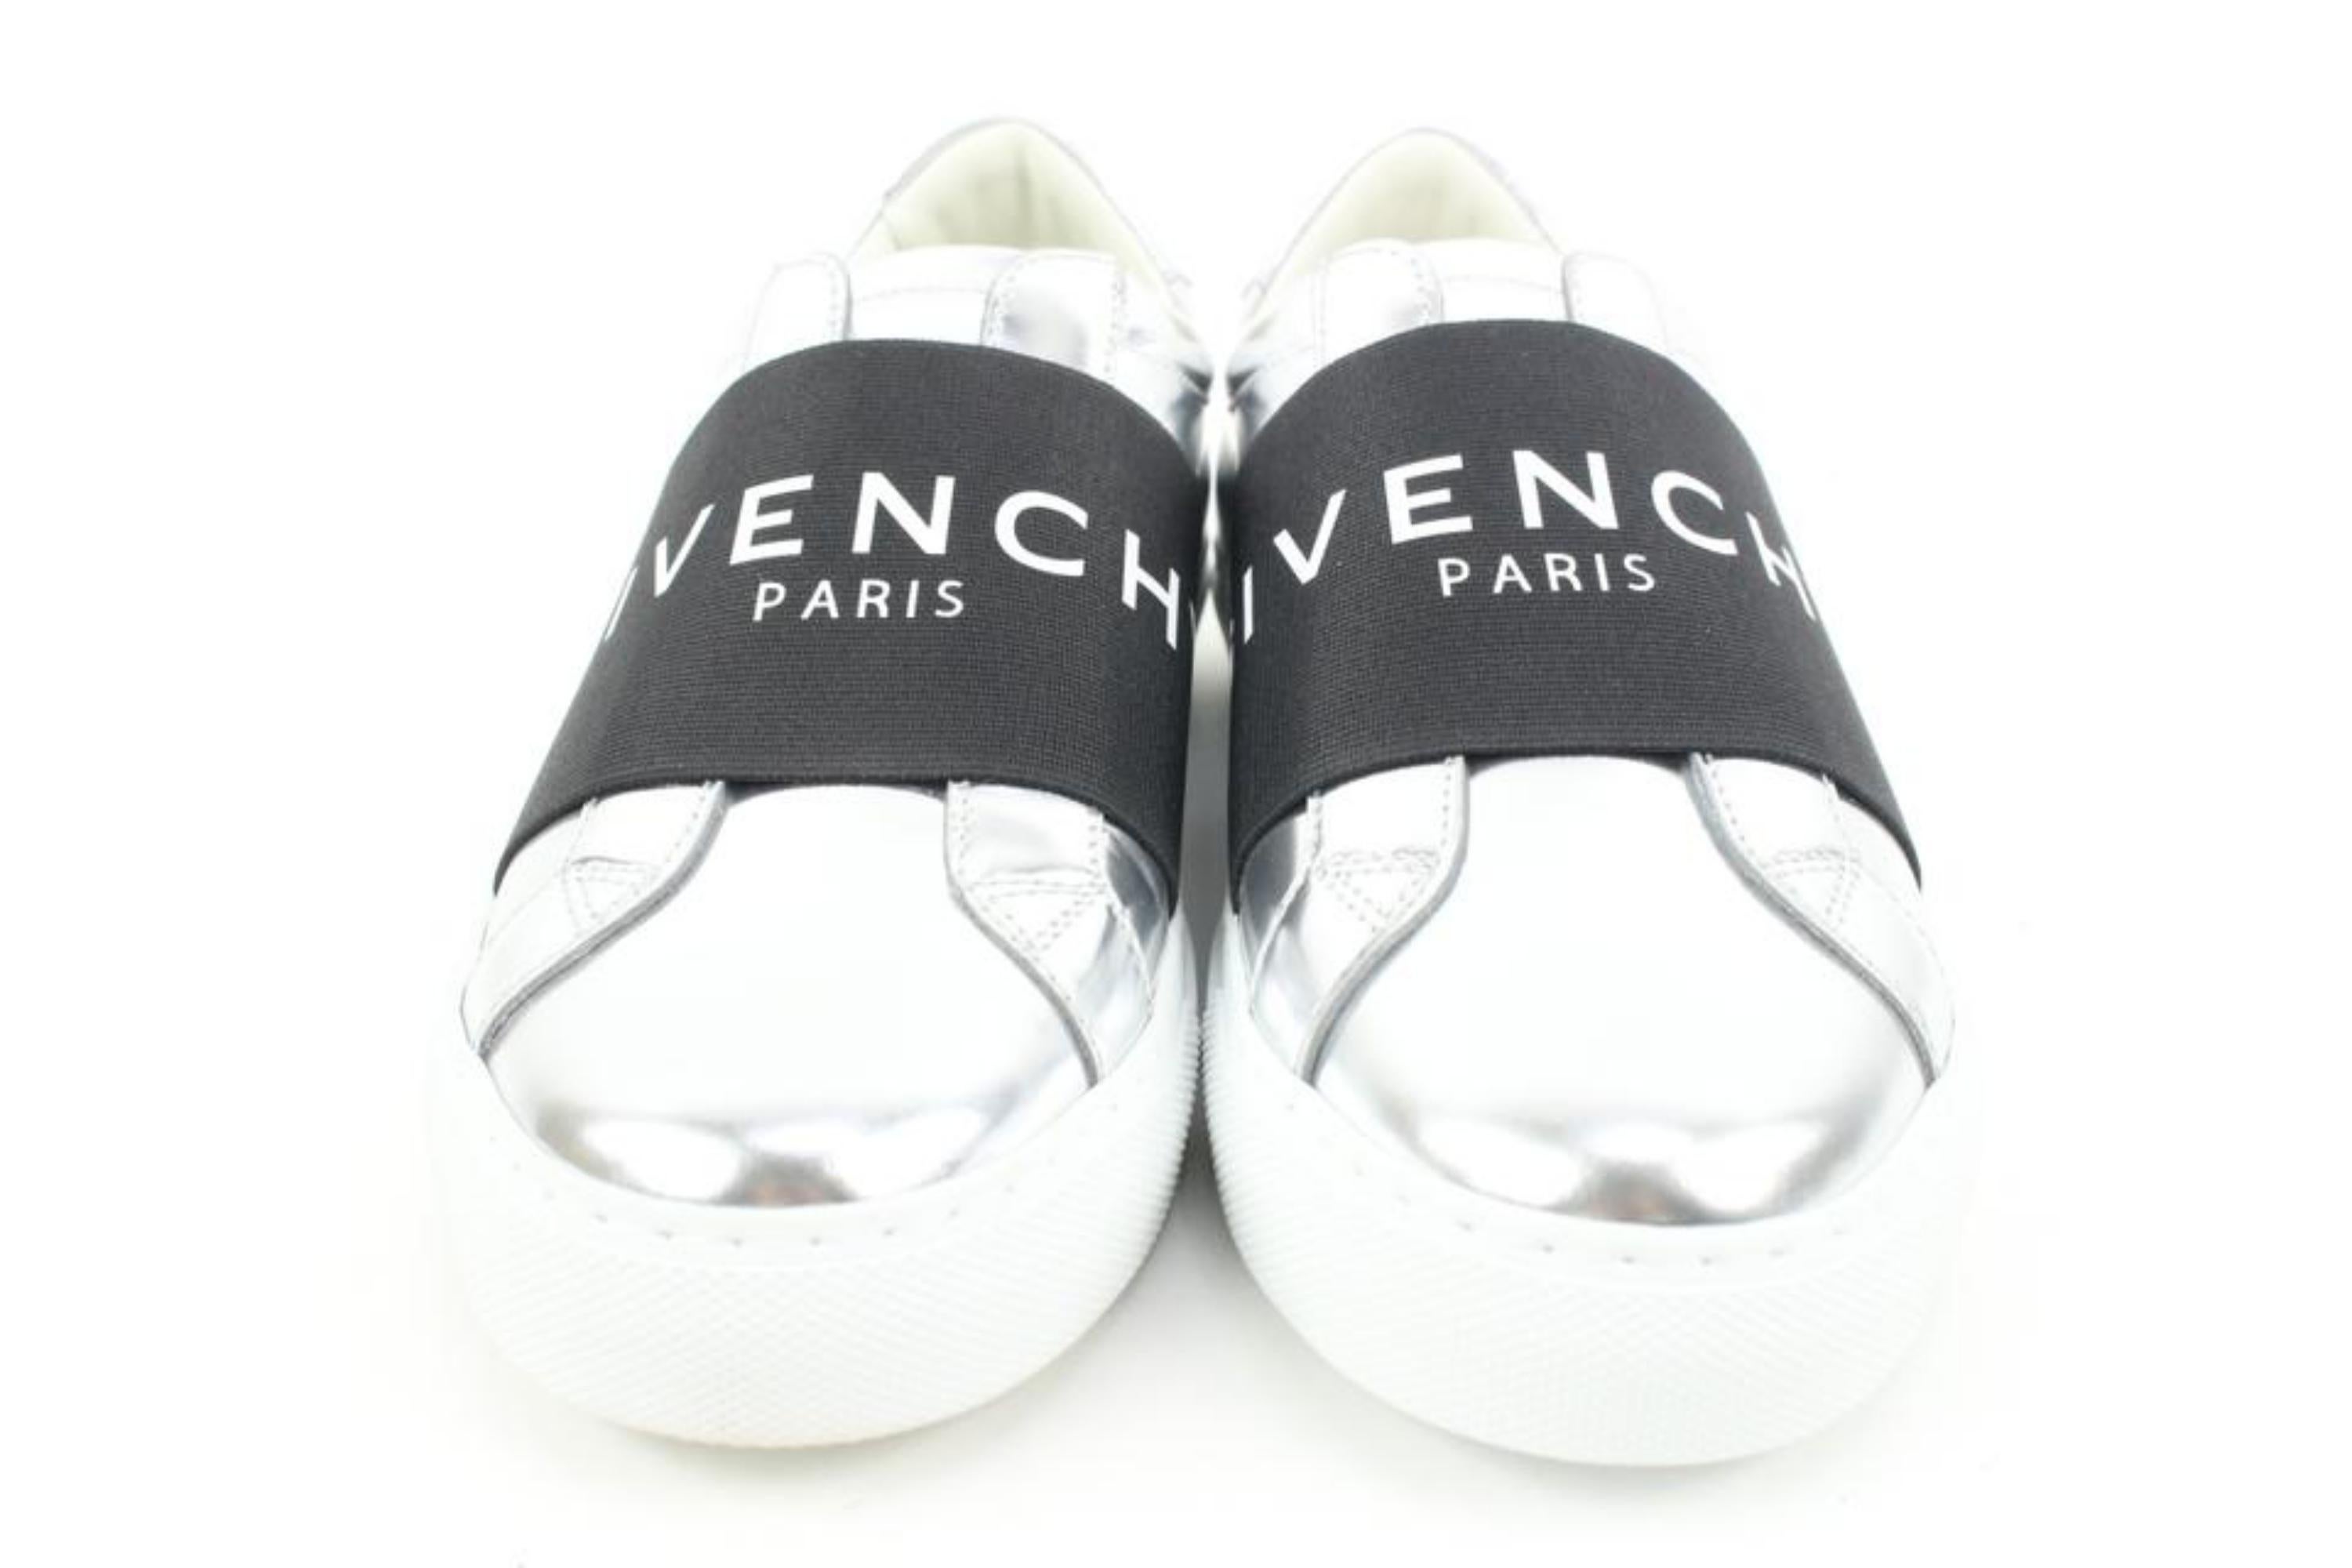 Givenchy Women's 35.5 Silver x Black Urban Street Sneaker 119gi51 In New Condition For Sale In Dix hills, NY